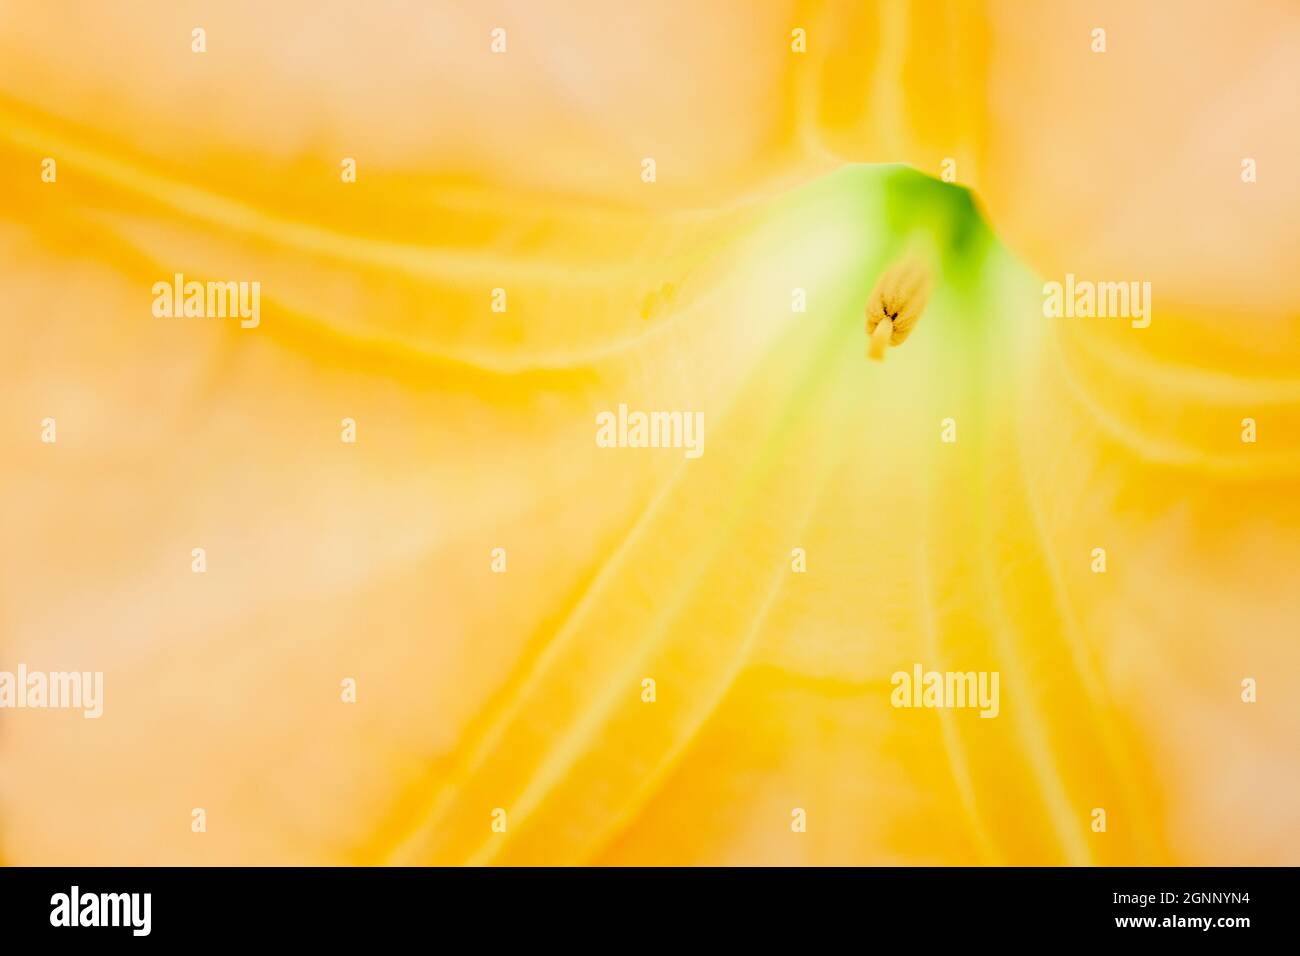 Inside a yellow Brugmansia Sanguinea or angel's Trumpet, creating an abstract floral image. High quality photo Stock Photo